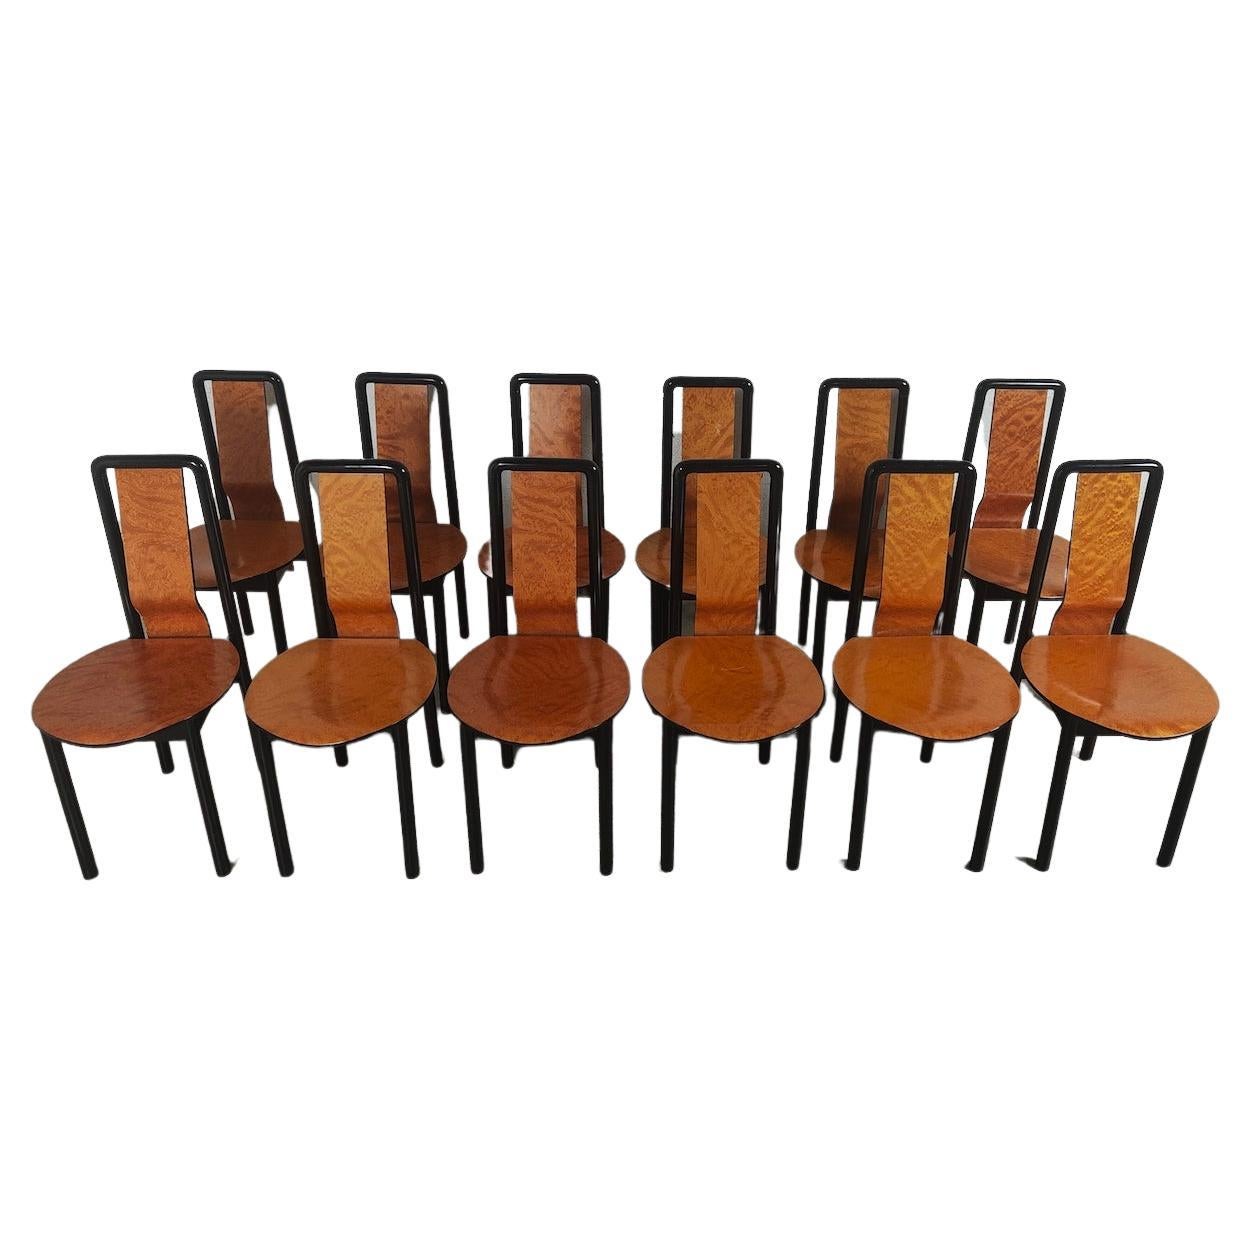 Set of 12 dining chairs by Pierre Cardin 1960s